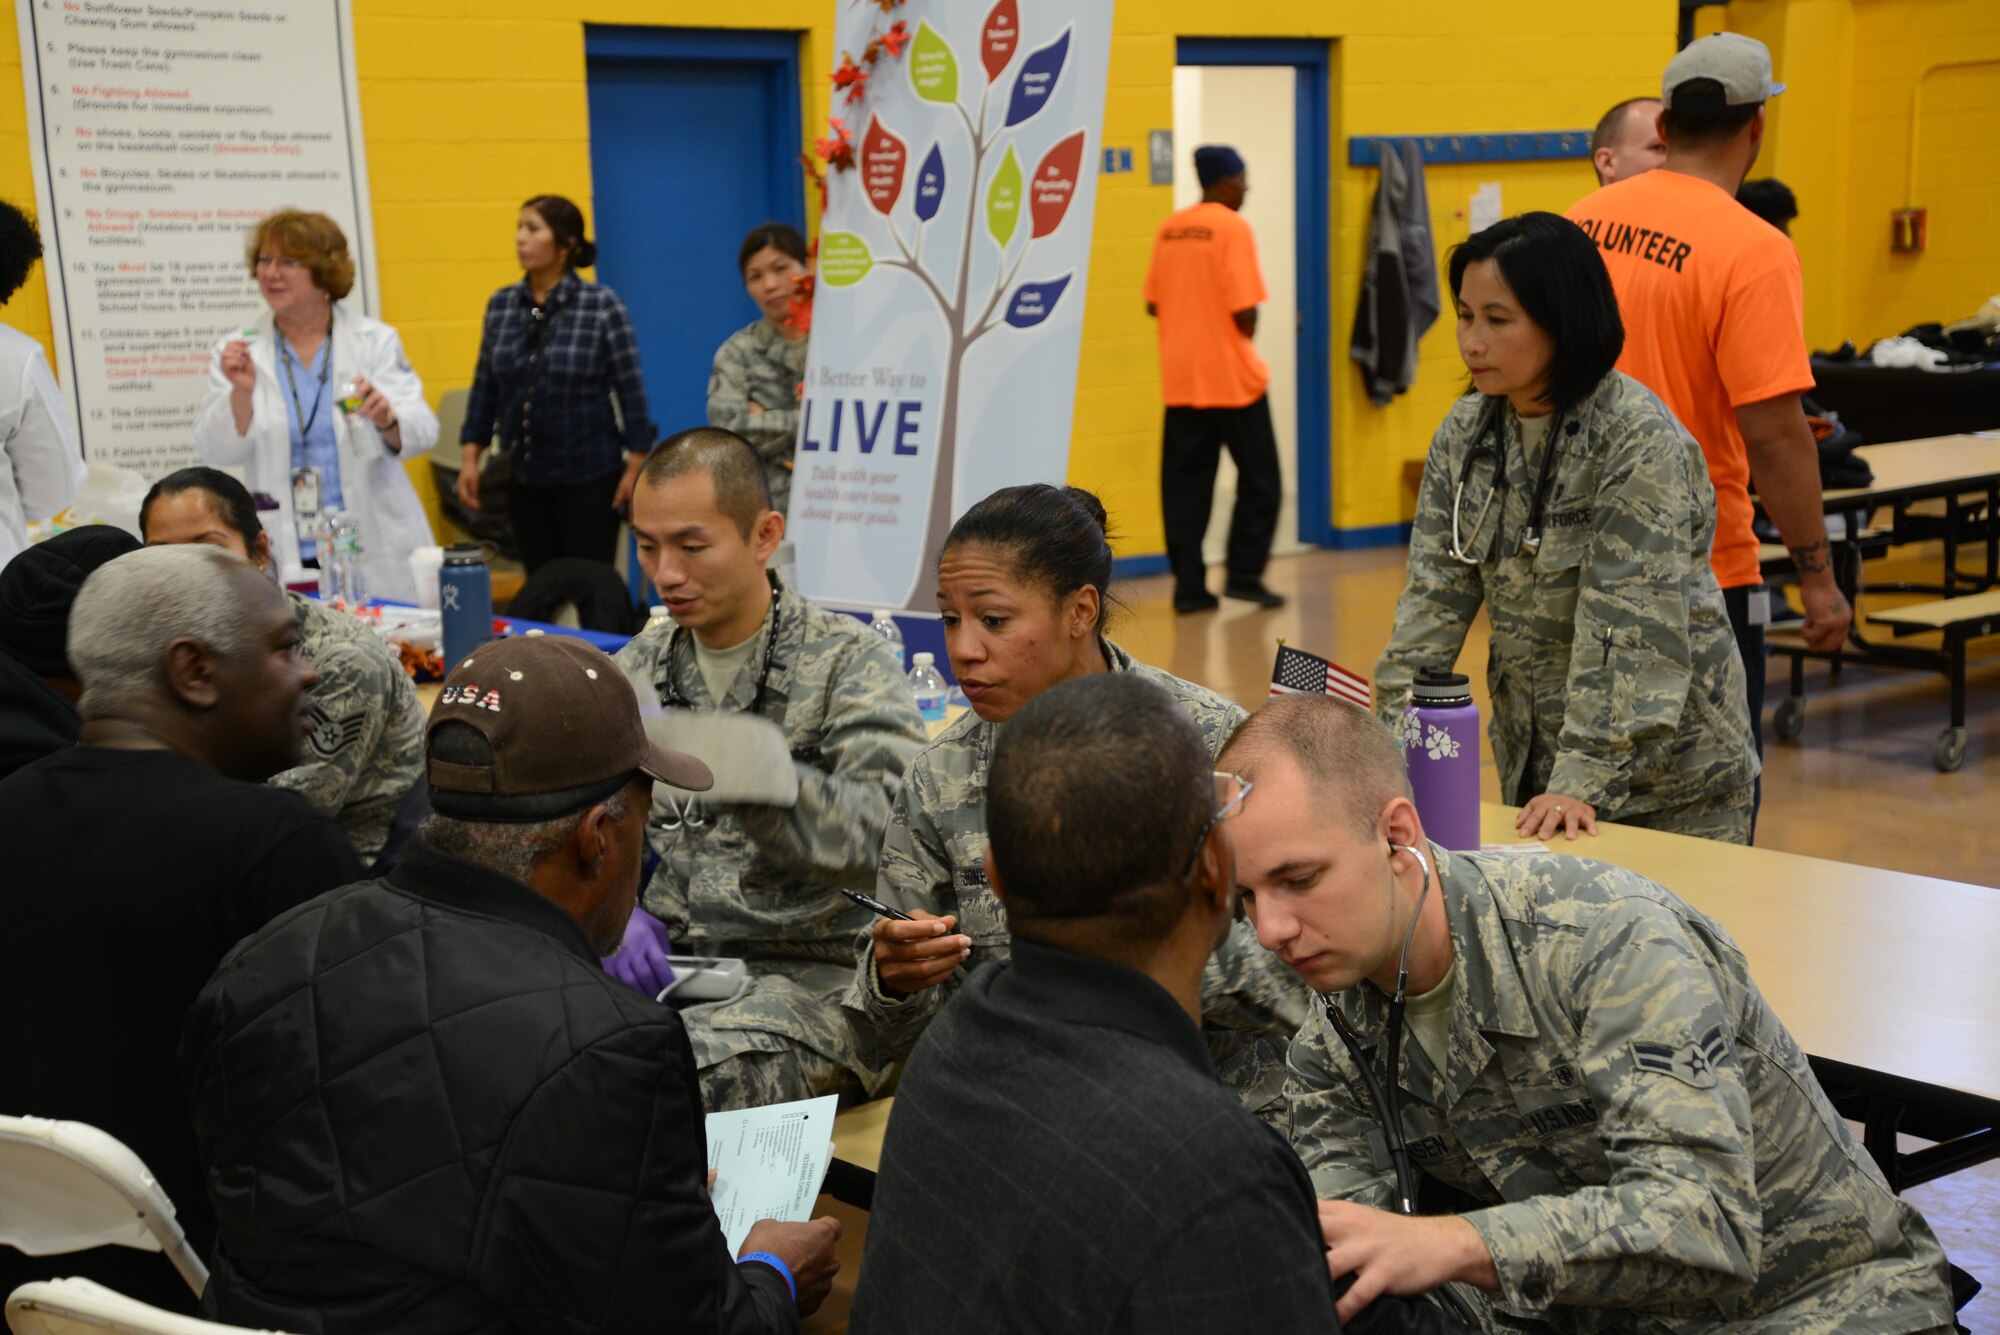 Members of the 108th Medical Group, New Jersey Air National Guard, provide blood pressure checks to homeless veterans at the New Jersey Department of Military and Veterans Affairs Stand Down Day at the John F. Kennedy recreation center in Newark, N.J. On Oct. 10, 2015. The stand down day allows the veterans to get much needed care and services from a wide array of state agencies and nonprofit organizations. Members of the 108th Medical Group have been providing care at stand down days for more than 10 years and were providing blood pressure checks as a means to have conversations with the veterans about their overall health and wellness. Stand Down is a military term referring to exhausted combat units that were removed from the battlefront to a place of security and safety for rest and recovery. Today, Stand Downs are grass roots, community-based intervention program to help veterans' battle life on the streets. (U.S. Air National Guard photo by Master Sgt. Carl Clegg, Released)

